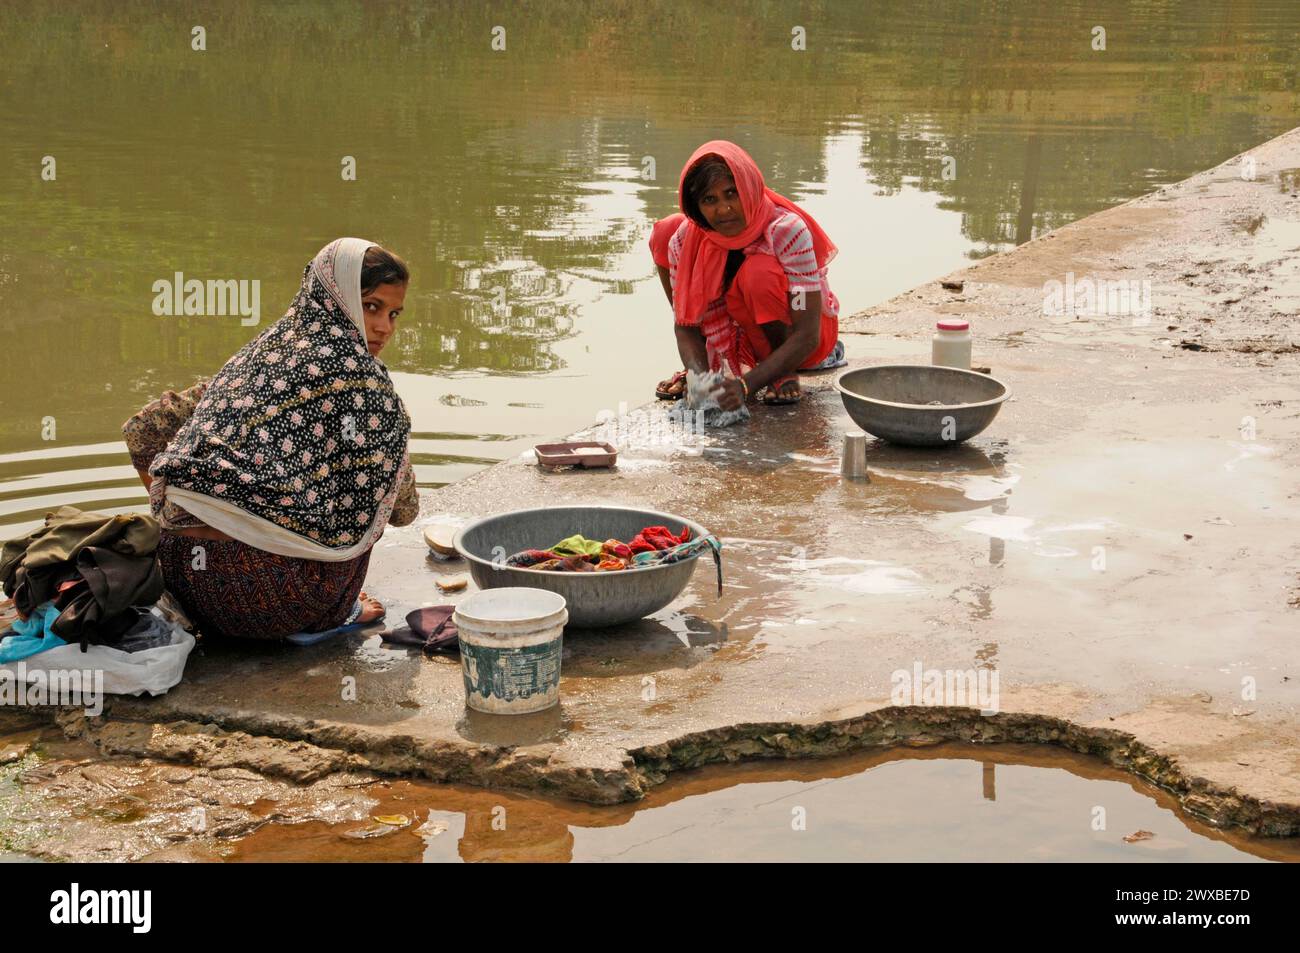 Two woman washing laundry and dishes on the riverbank in traditional clothing, Udaipur, Rajasthan, North India, India Stock Photo